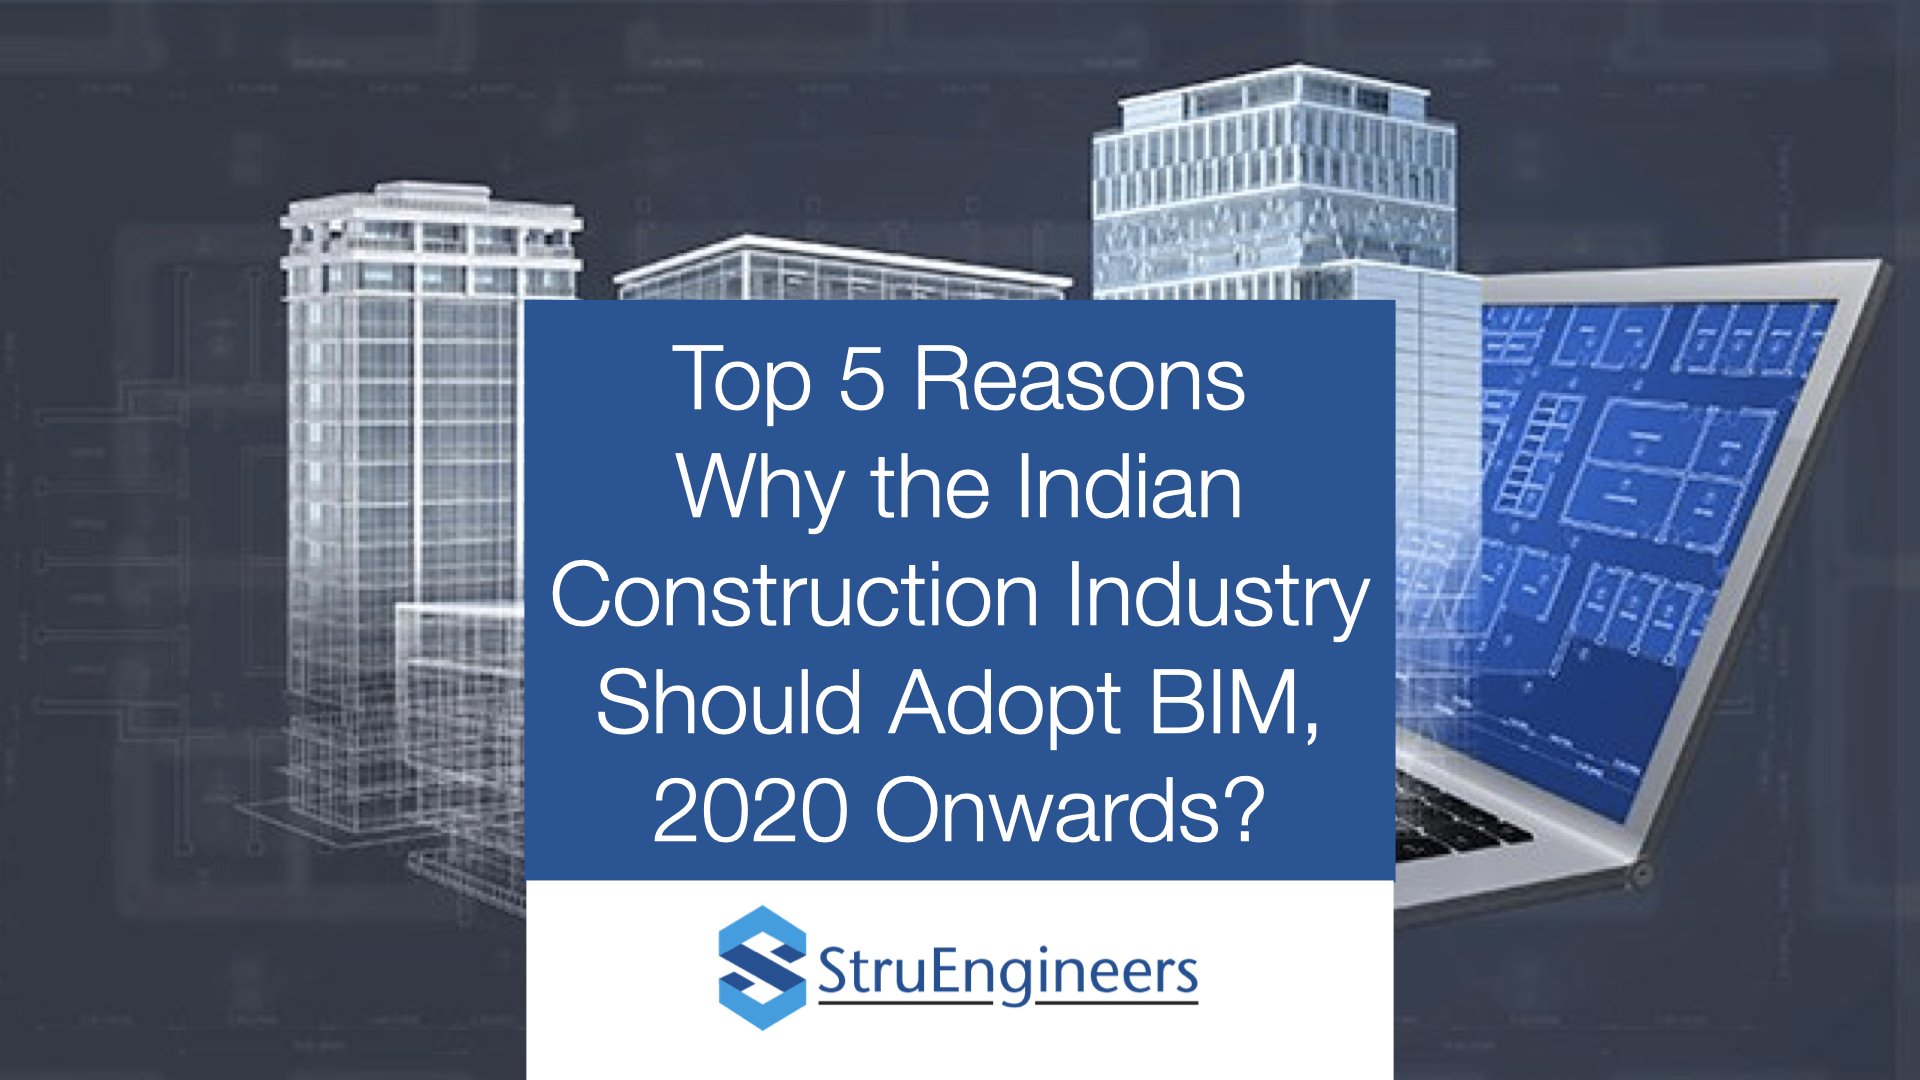 Top 5 reasons why the Indian construction industry should adopt BIM